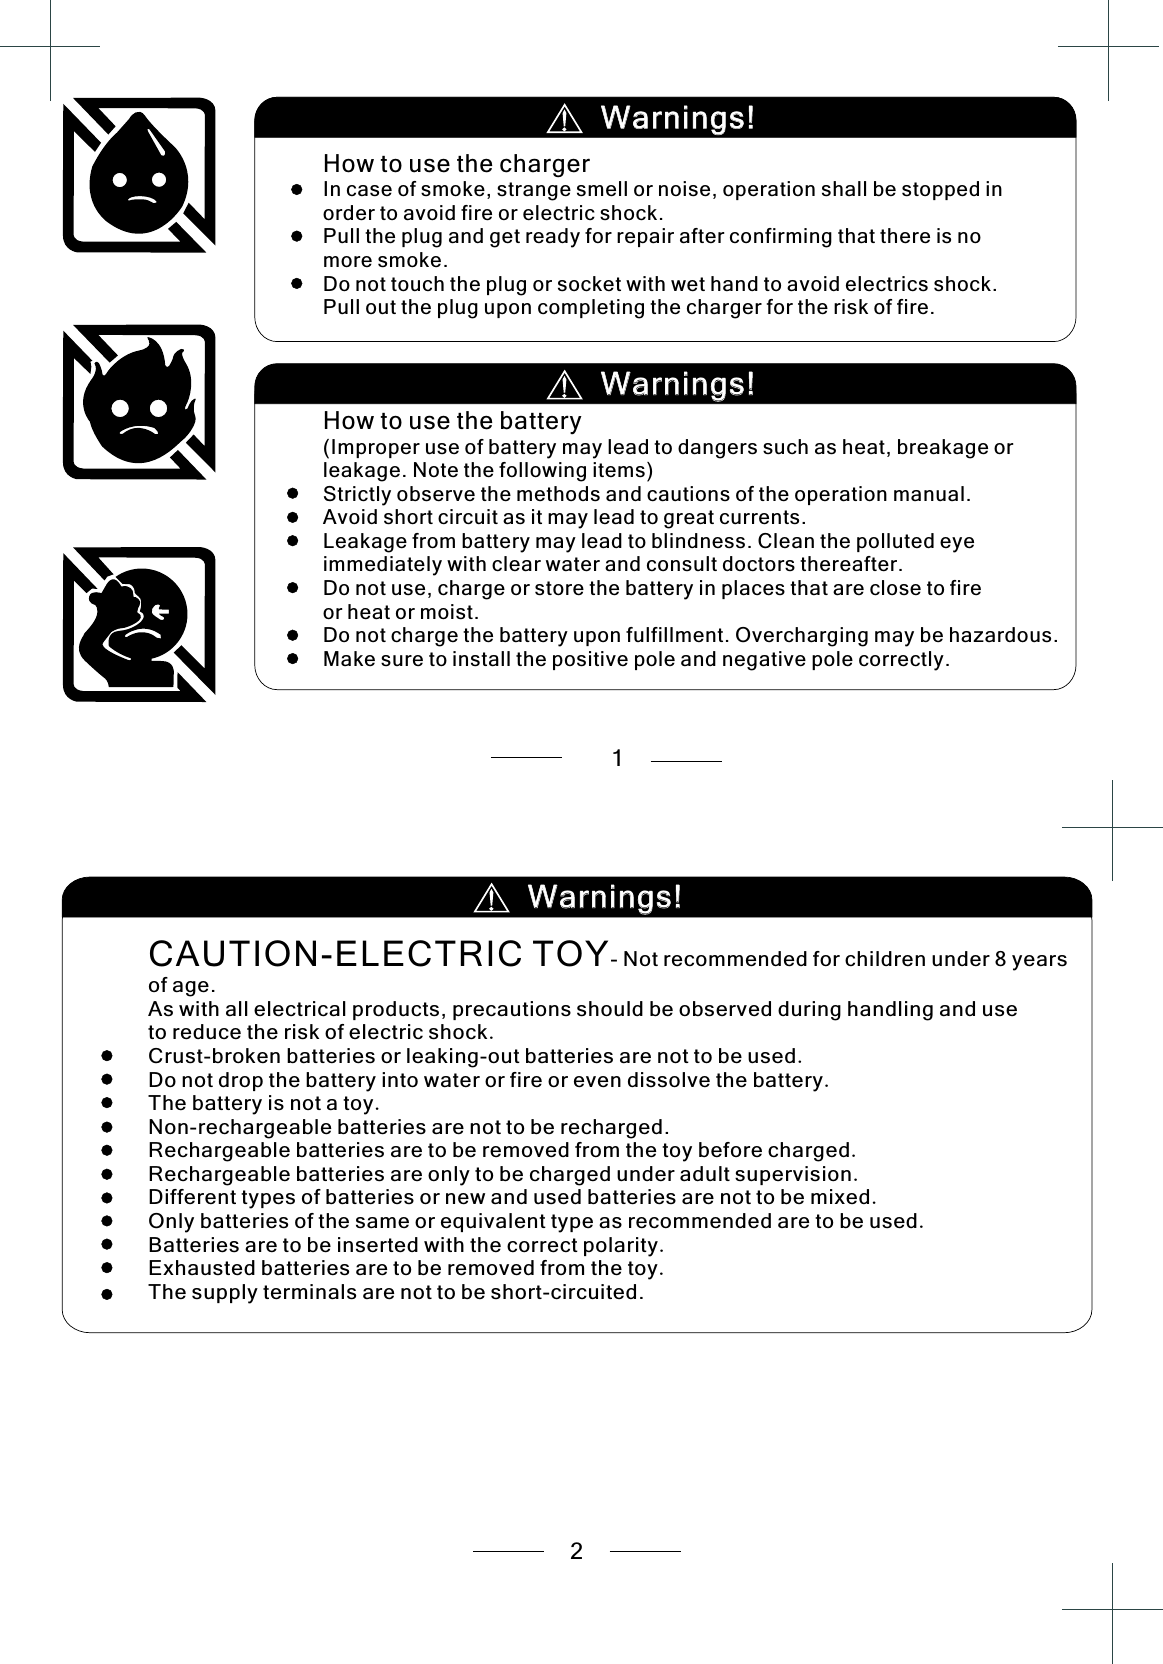       2      1.Crust-broken batteries or leaking-out batteries are not to be used.Do not drop the battery into water or fire or even dissolve the battery.The battery is not a toy.Non-rechargeable batteries are not to be recharged.Rechargeable batteries are to be removed from the toy before charged.Rechargeable batteries are only to be charged under adult supervision.Different types of batteries or new and used batteries are not to be mixed.Only batteries of the same or equivalent type as recommended are to be used.Batteries are to be inserted with the correct polarity.Exhausted batteries are to be removed from the toy.The supply terminals are not to be short-circuited.CAUTION-ELECTRIC TOY- Not recommended for children under 8 years of age.As with all electrical products, precautions should be observed during handling and use to reduce the risk of electric shock  Warnings!Warnings!Warnings!Warnings!How to use the chargerIn case of smoke, strange smell or noise, operation shall be stopped in order to avoid fire or electric shock.Pull the plug and get ready for repair after confirming that there is no more smoke.Do not touch the plug or socket with wet hand to avoid electrics shock.Pull out the plug upon completing the charger for the risk of fire.How to use the battery(Improper use of battery may lead to dangers such as heat, breakage or leakage. Note the following items)Strictly observe the methods and cautions of the operation manual.Avoid short circuit as it may lead to great currents.Leakage from battery may lead to blindness. Clean the polluted eye immediately with clear water and consult doctors thereafter.Do not use, charge or store the battery in places that are close to fire or heat or moist.Do not charge the battery upon fulfillment. Overcharging may be hazardous.Make sure to install the positive pole and negative pole correctly. Warnings!Warnings!